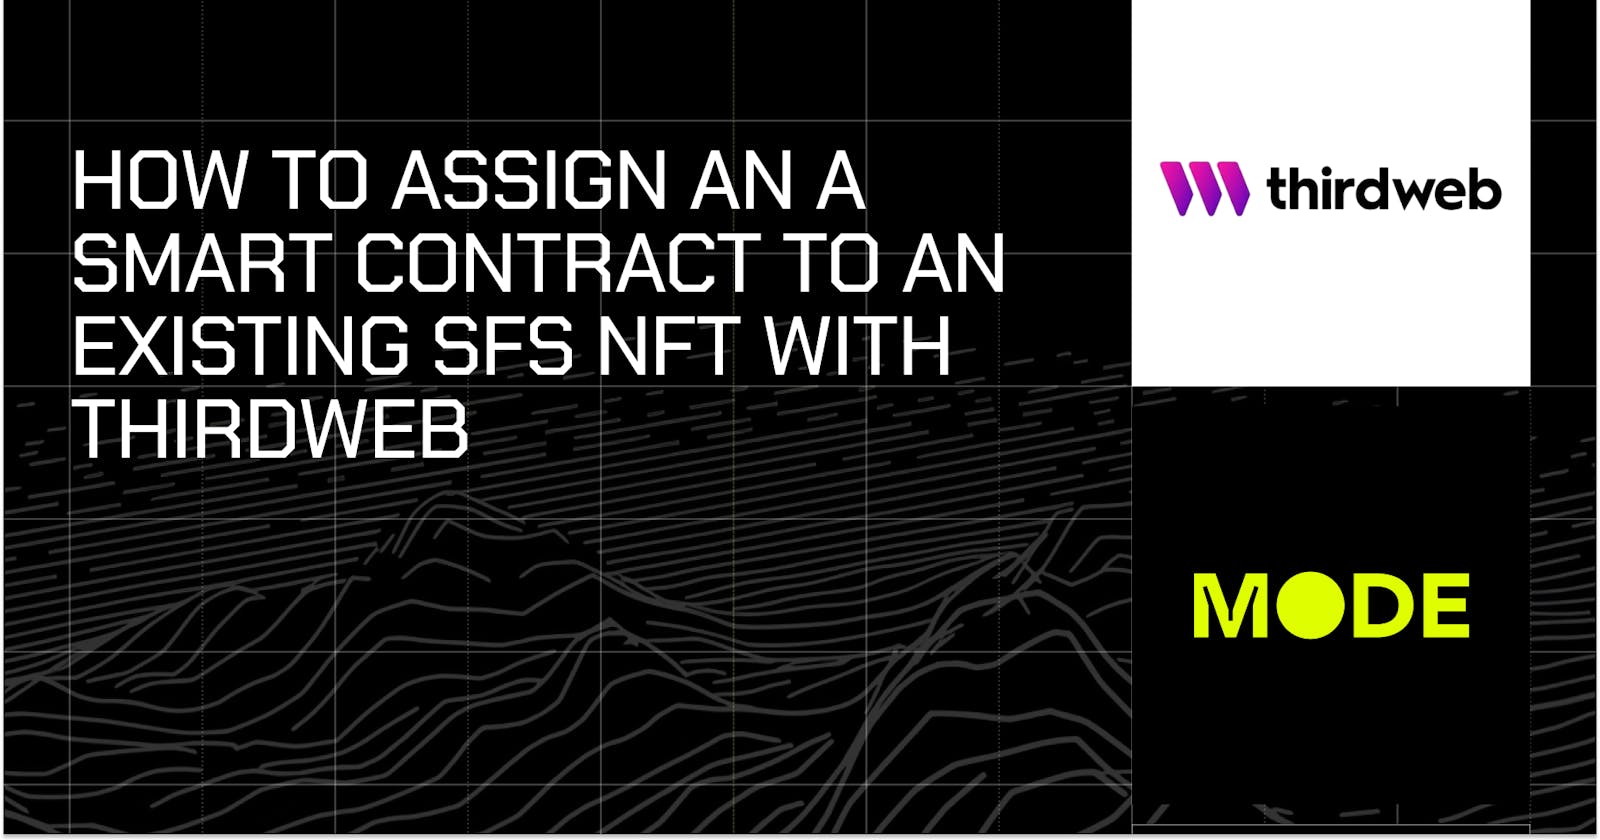 Assign a smart contract to an existing SFS NFT with Thirdweb deployment